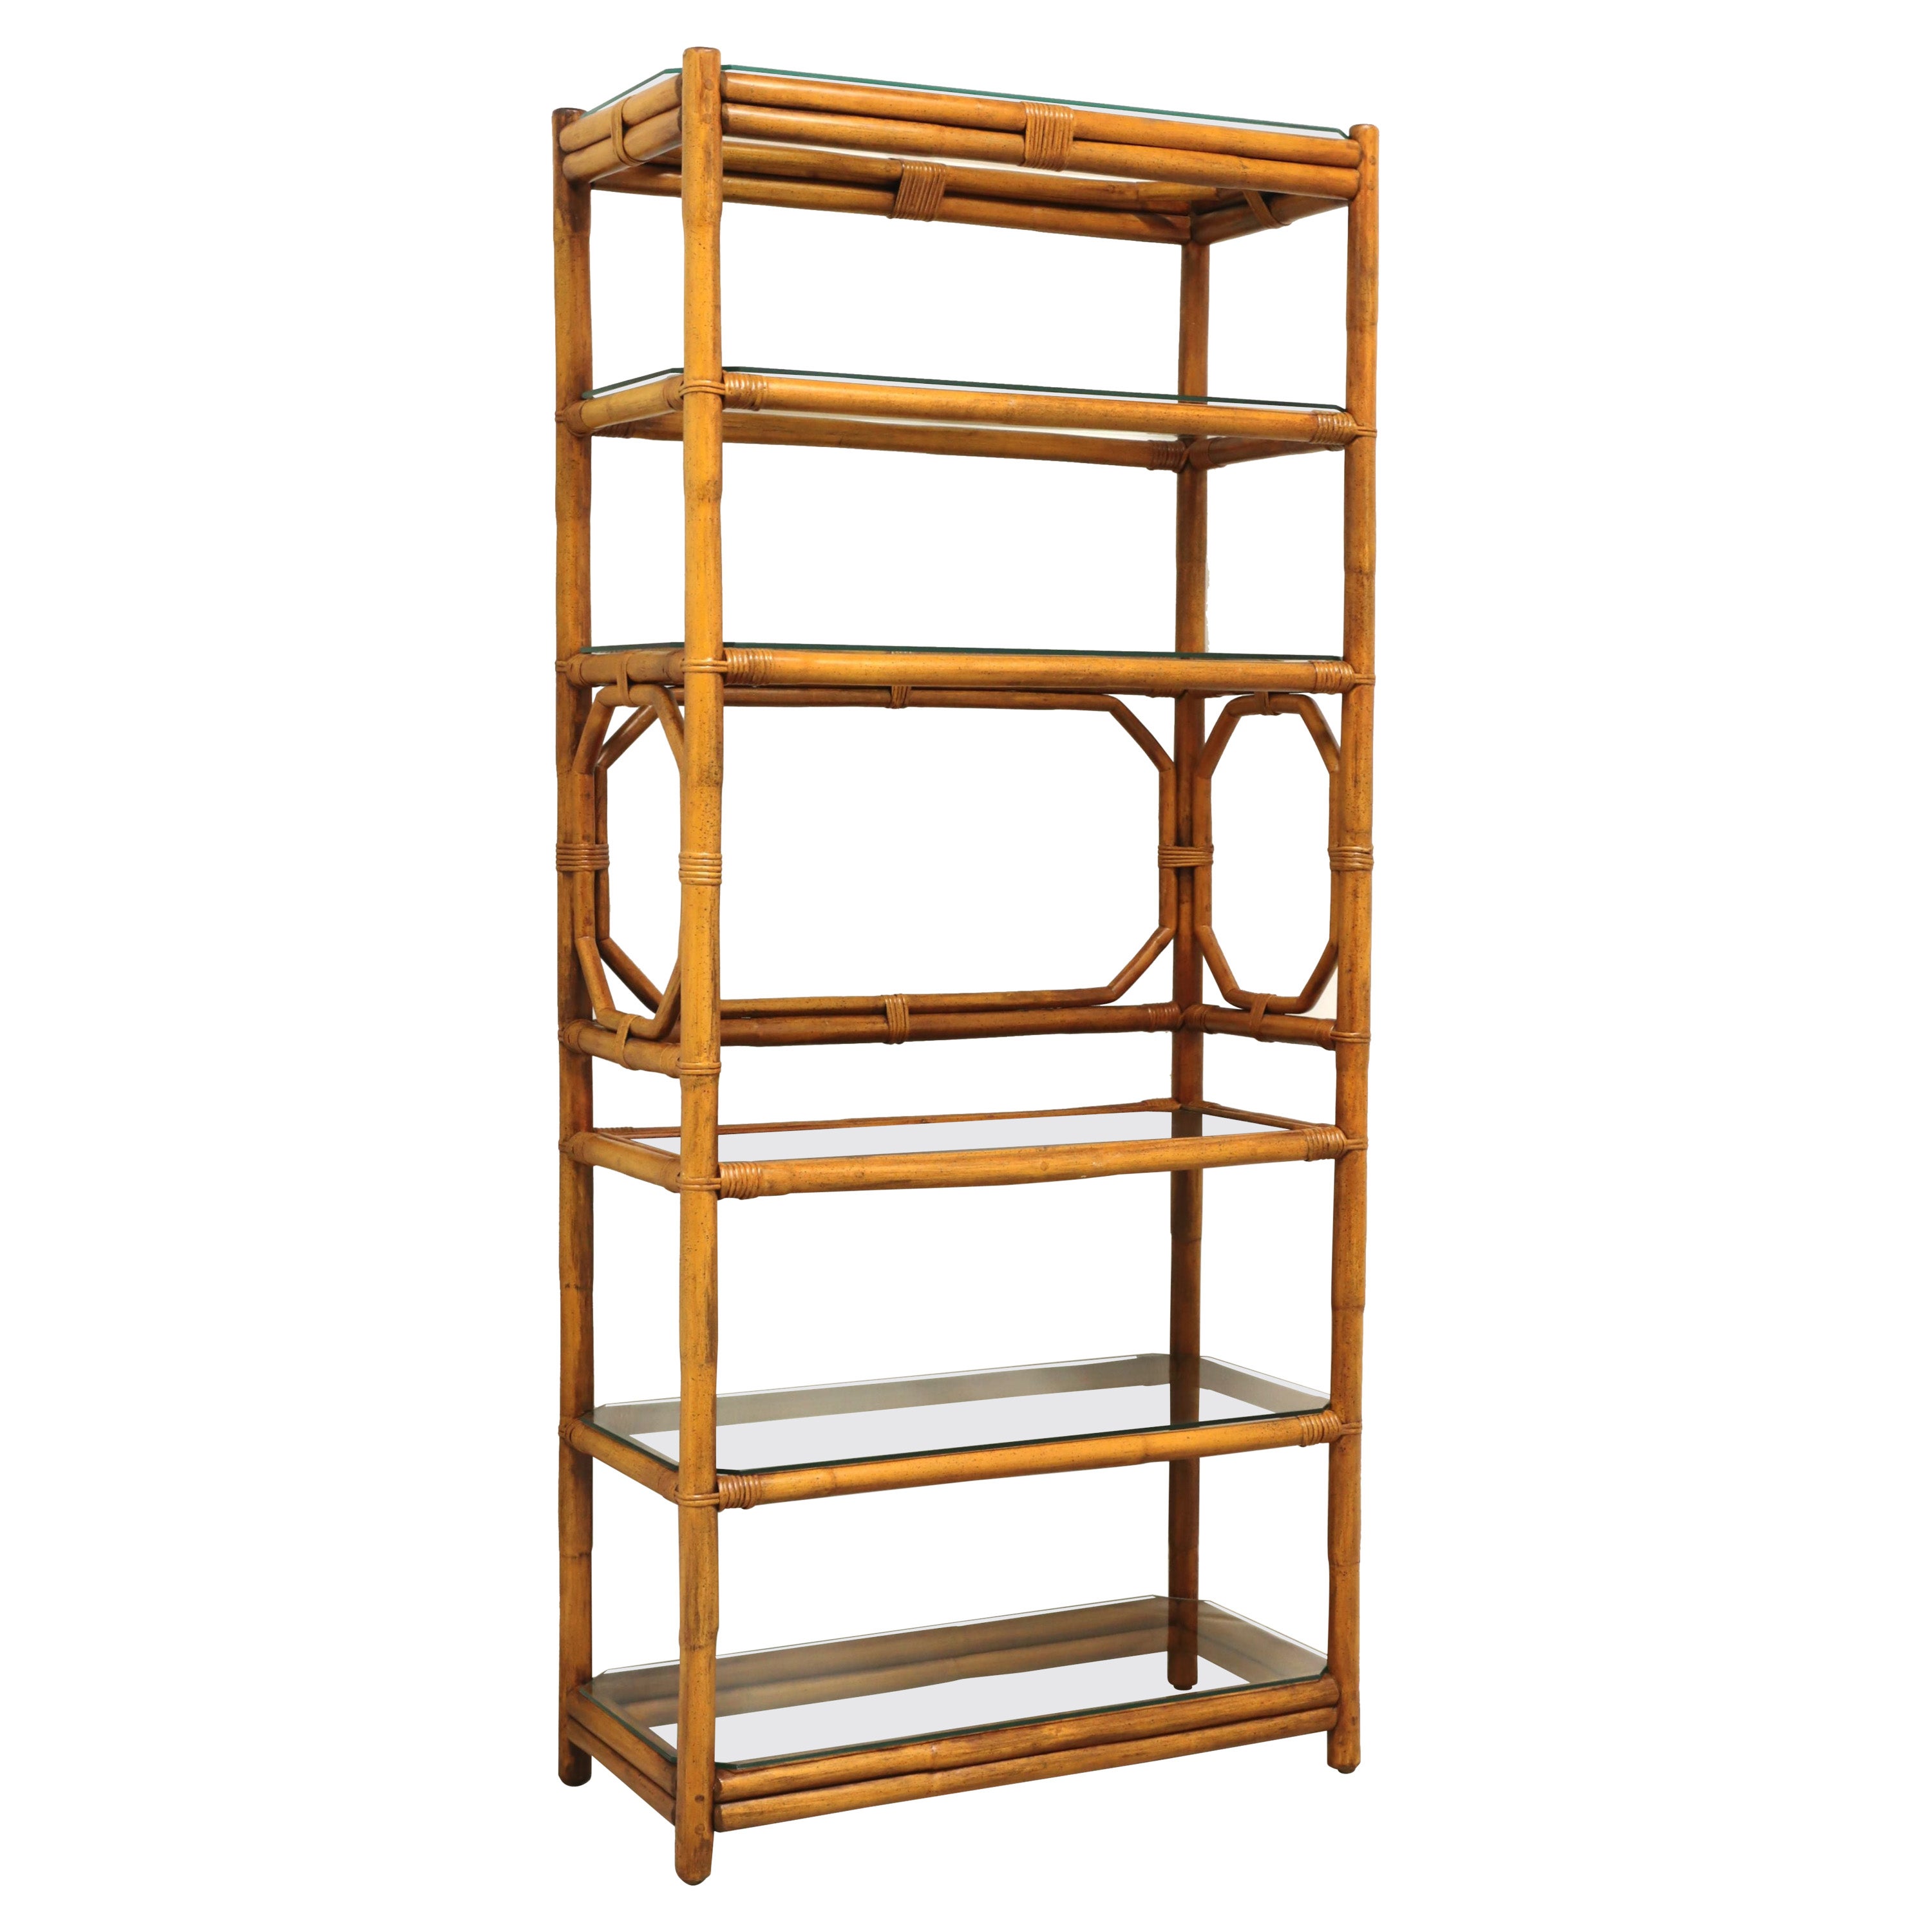 FICKS REED Mid 20th Century Faux Bamboo Rattan Etagere Display Shelving Unit